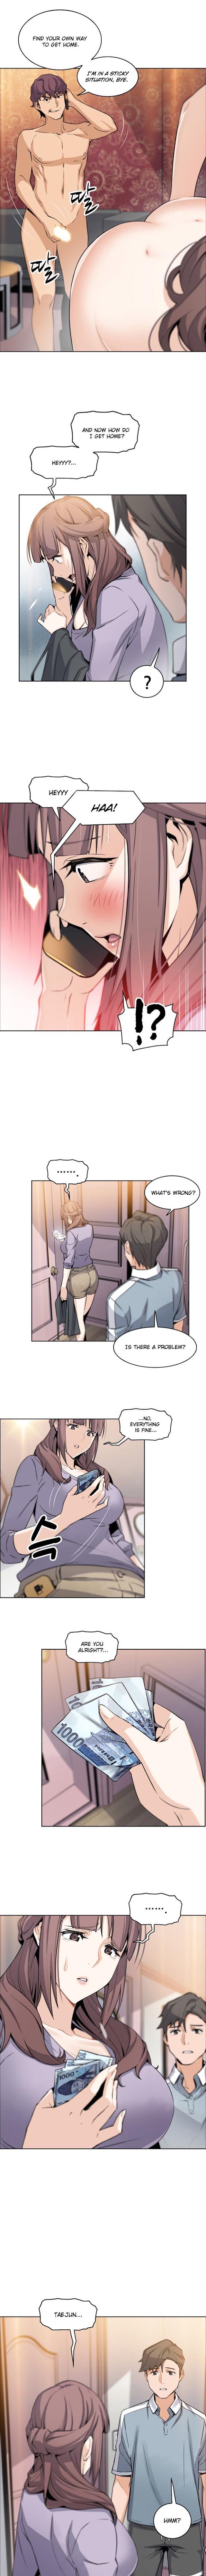 Housekeeper [Neck Pillow, Paper] Ch.49/49 [English] [Manhwa PDF] Completed 104